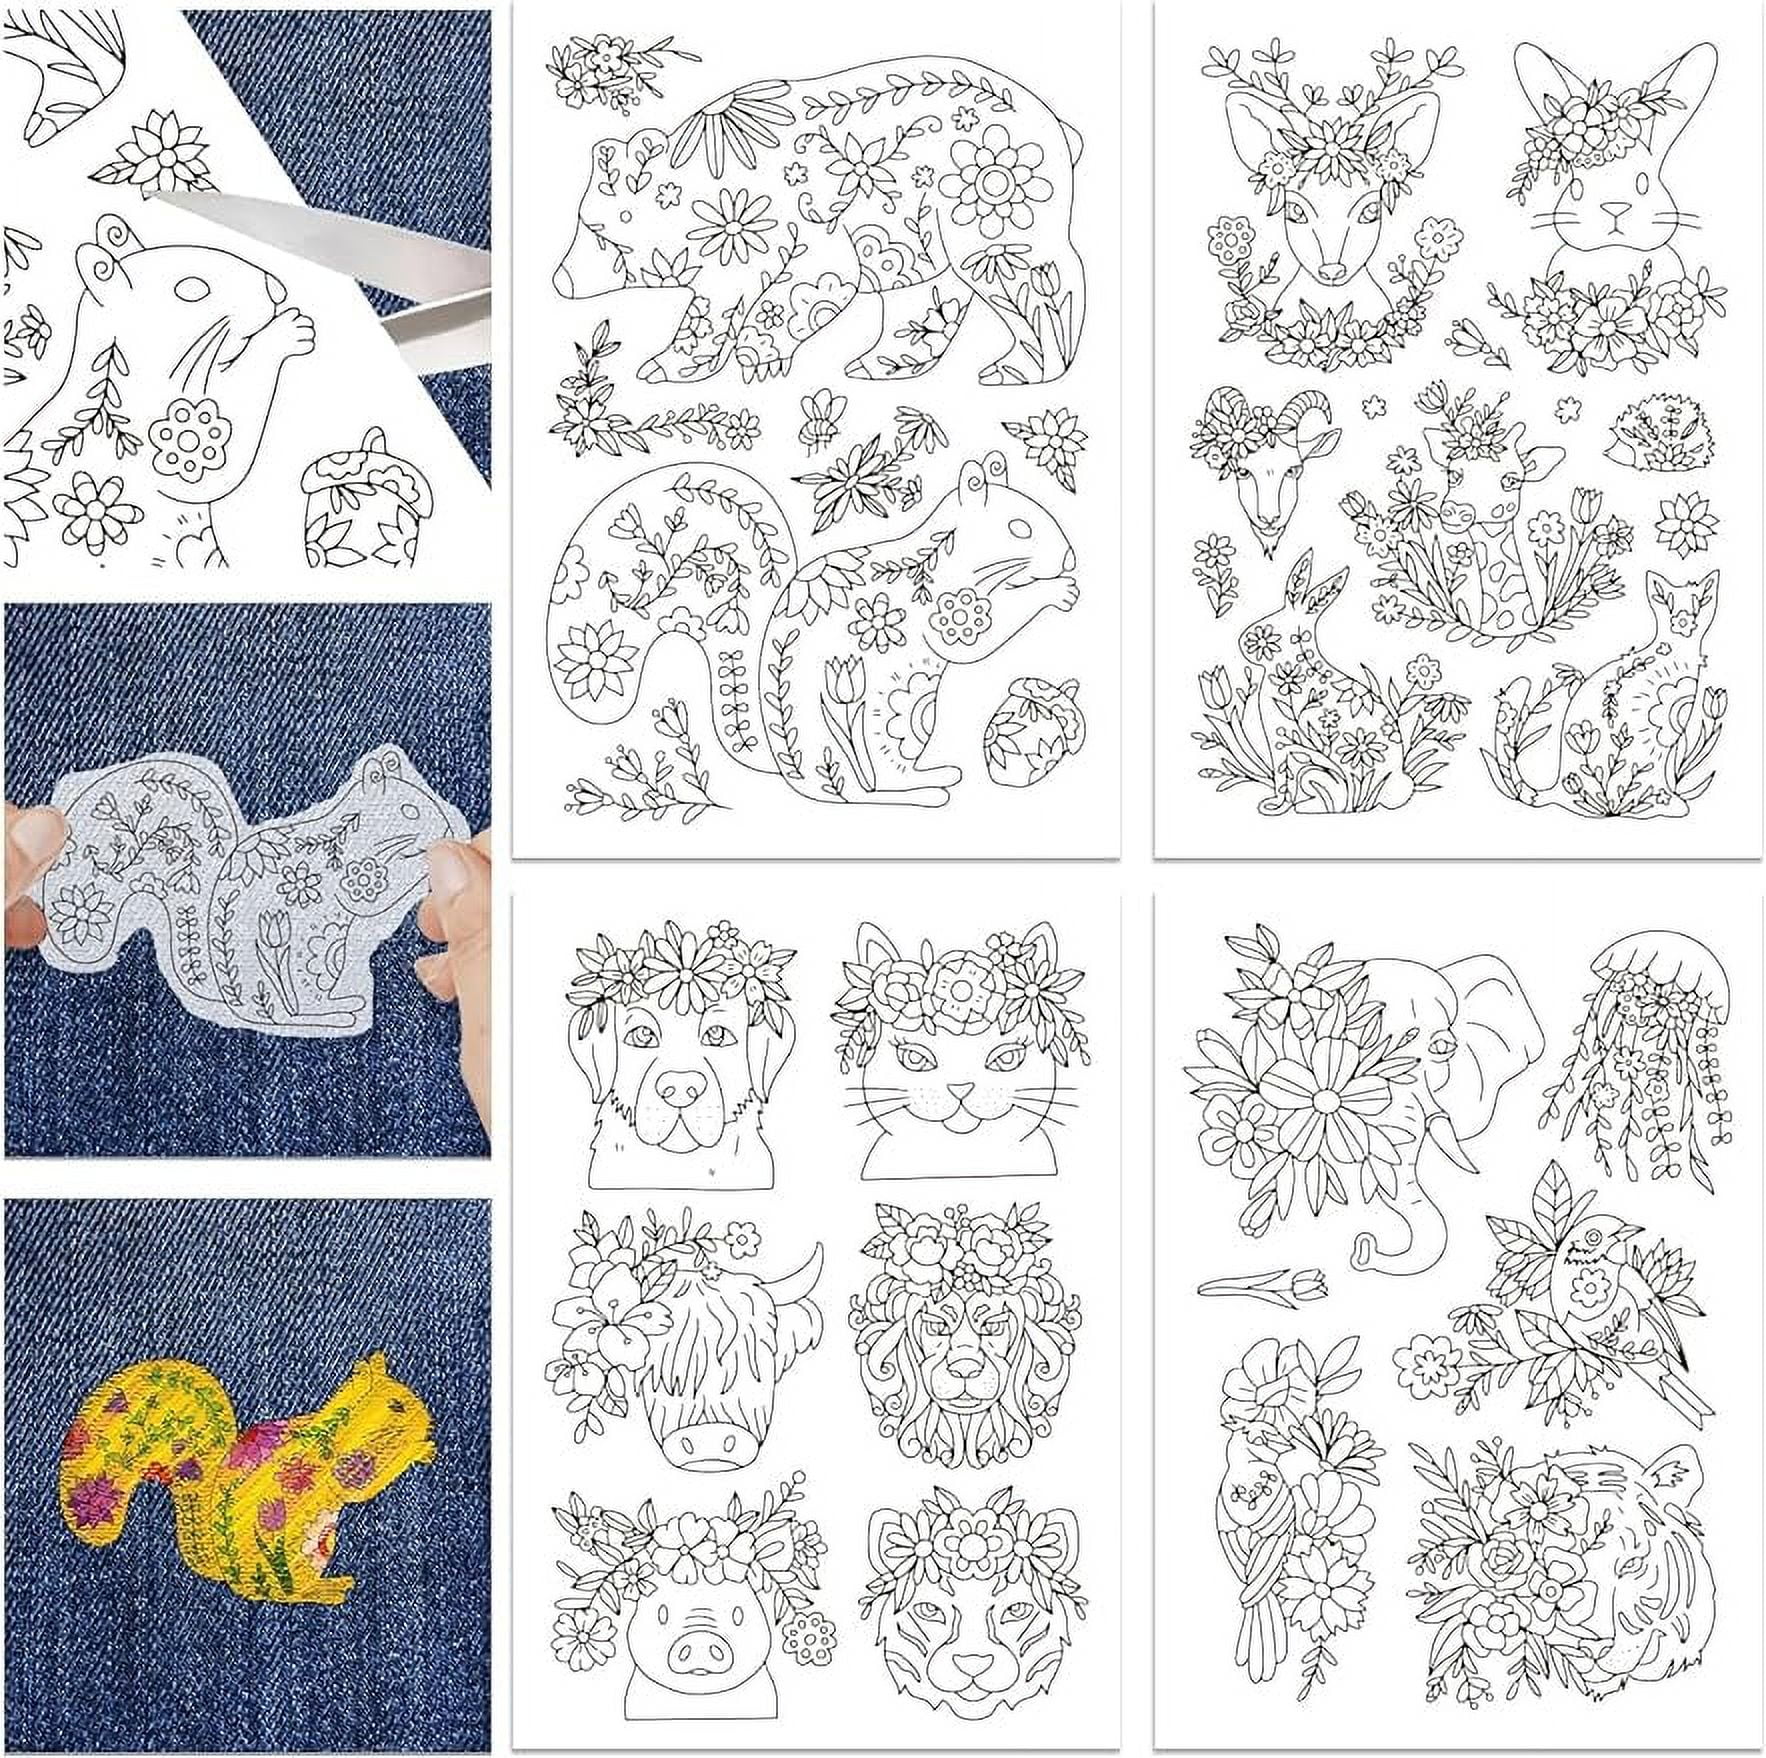  4 Sheet Embroidery Patterns, Water Soluble Hand Sewing  Stabilizers Stick And Stitch Embroidery Stabilizers